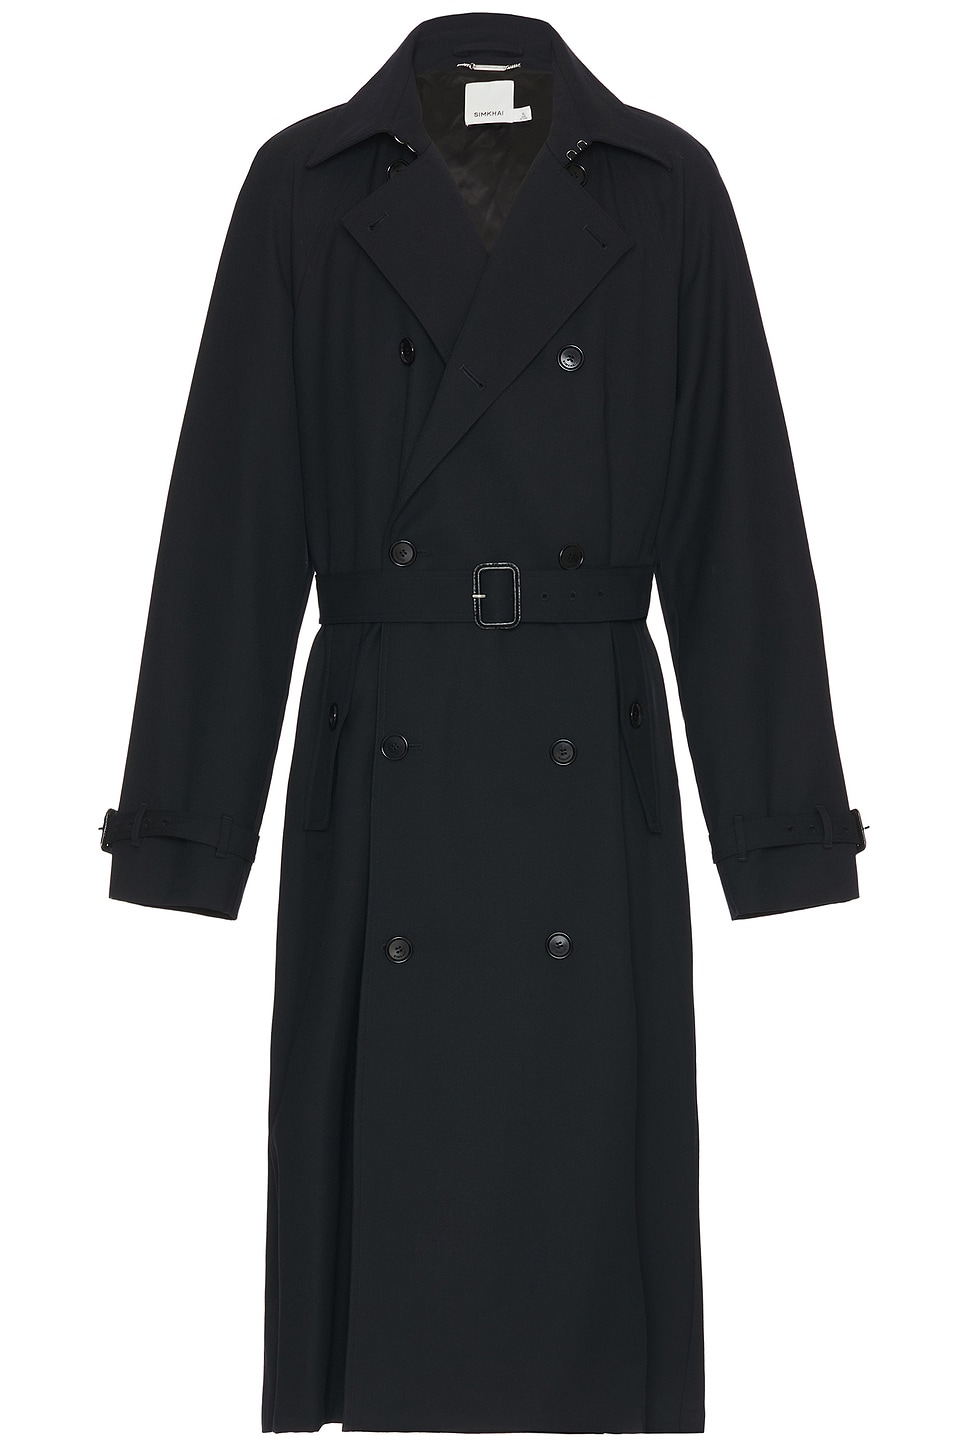 Shop Simkhai Clive Belted Trench In Black